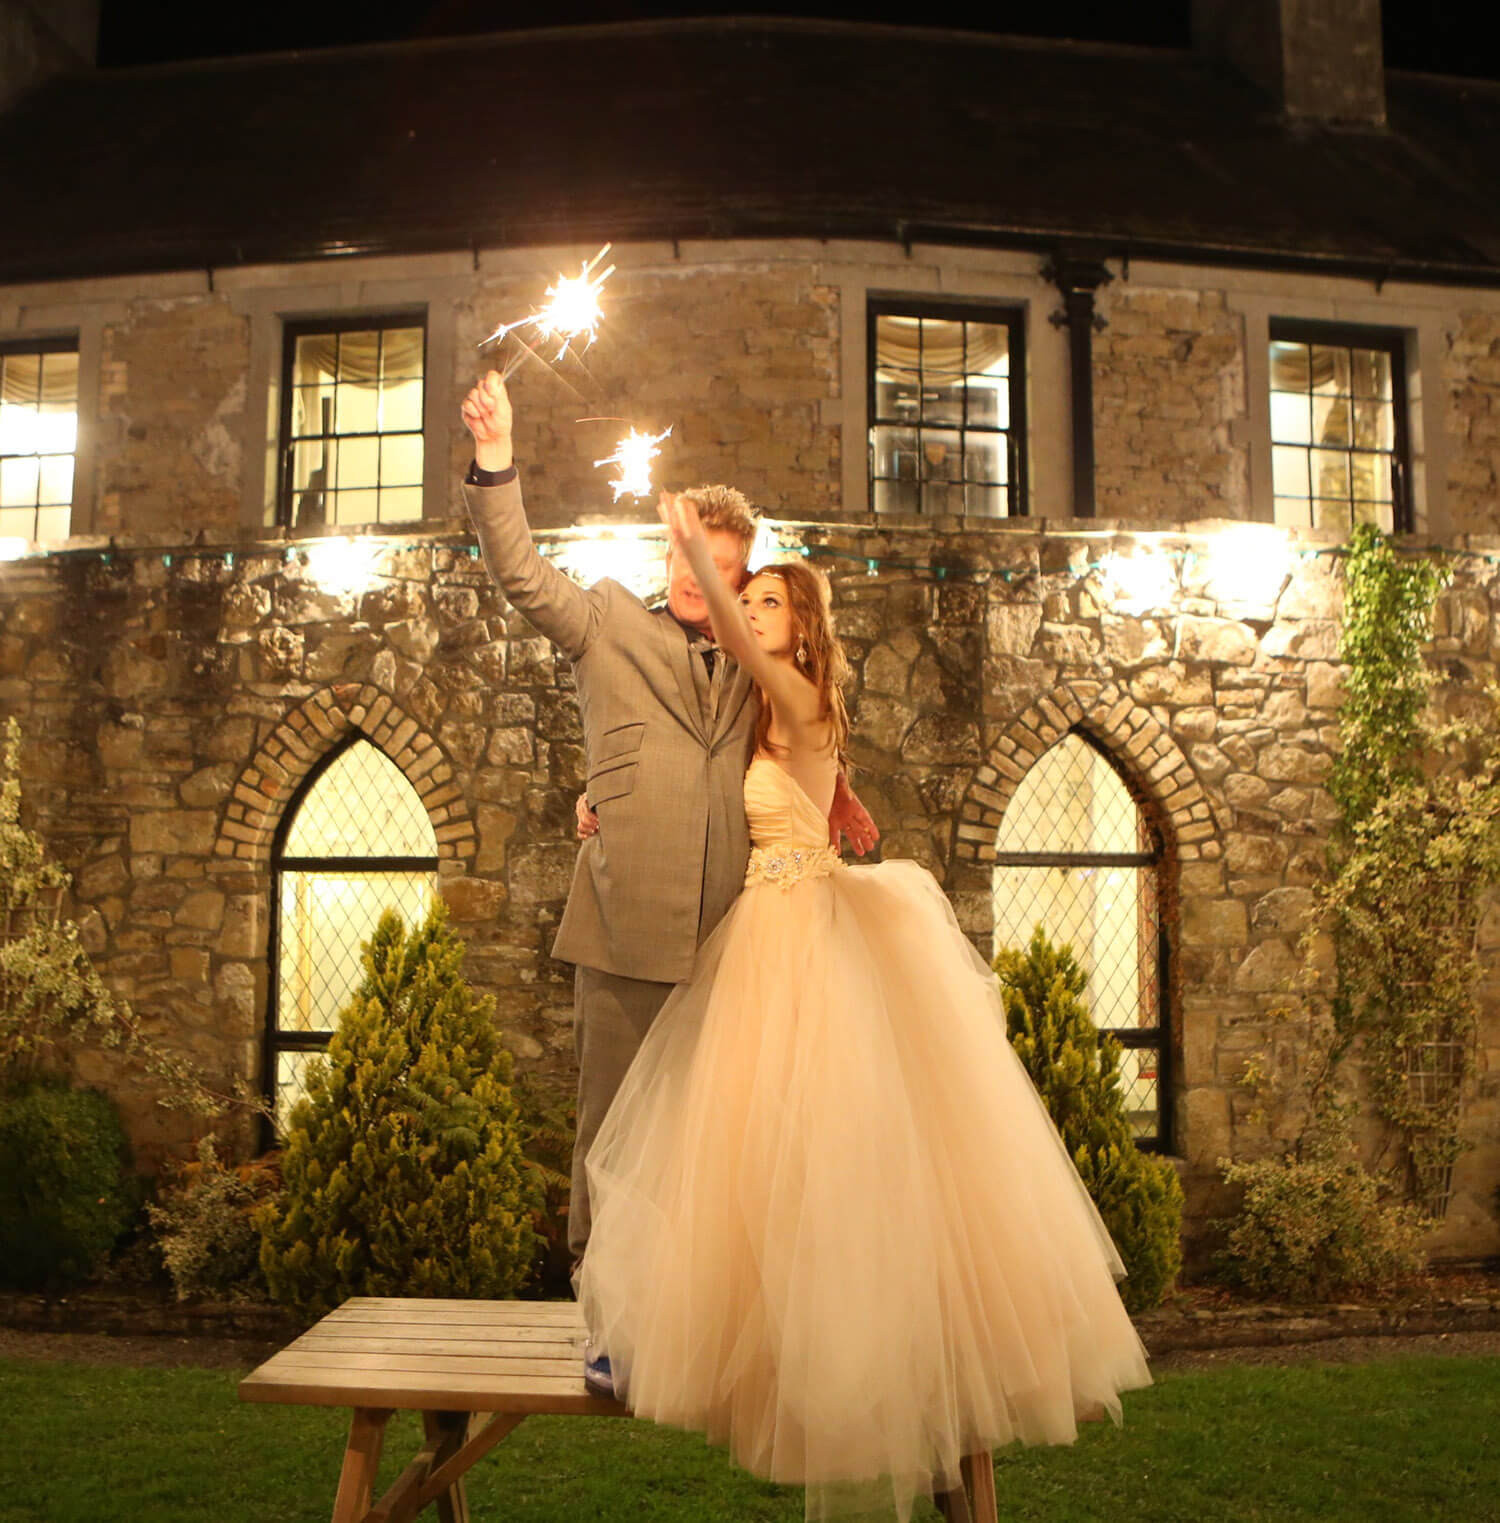 Where To Buy Sparklers For Wedding
 10 inch Wedding Sparklers